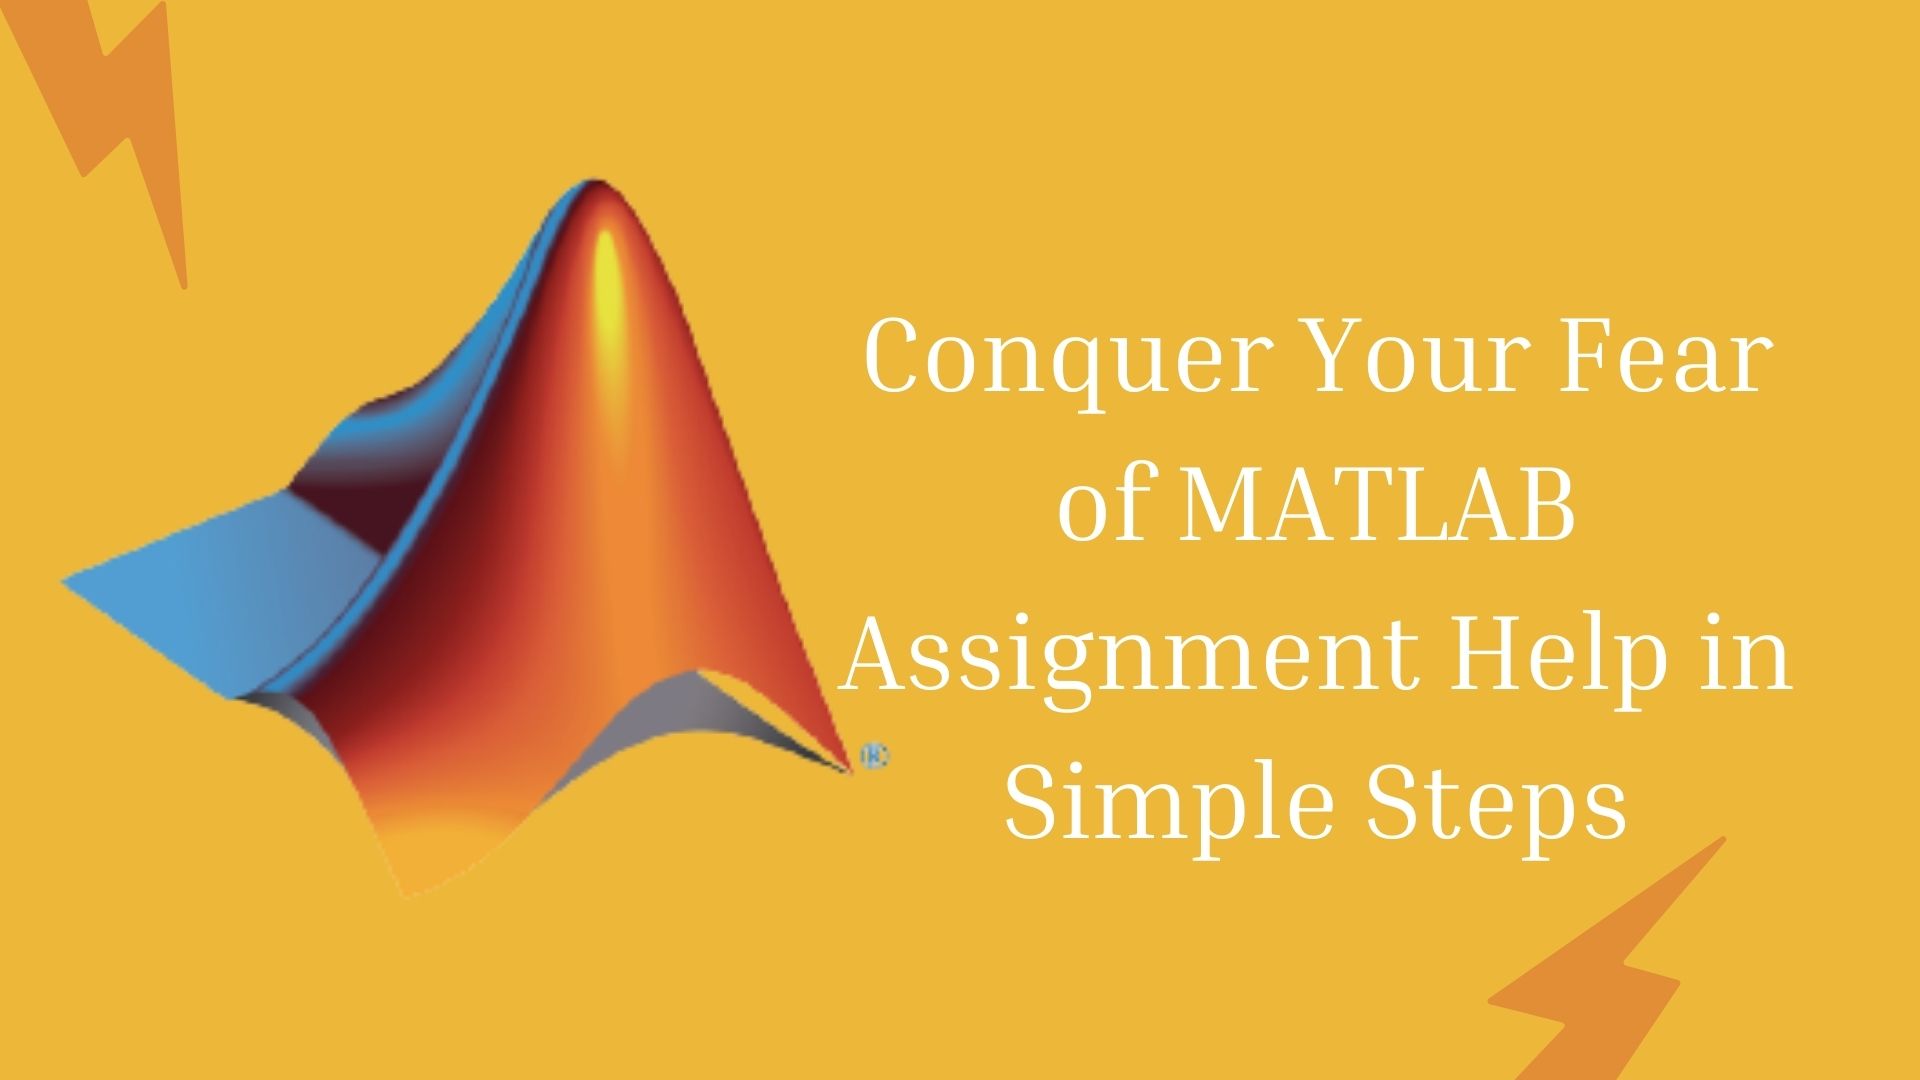 Conquer Your Fear of MATLAB Assignment Help in Simple Steps